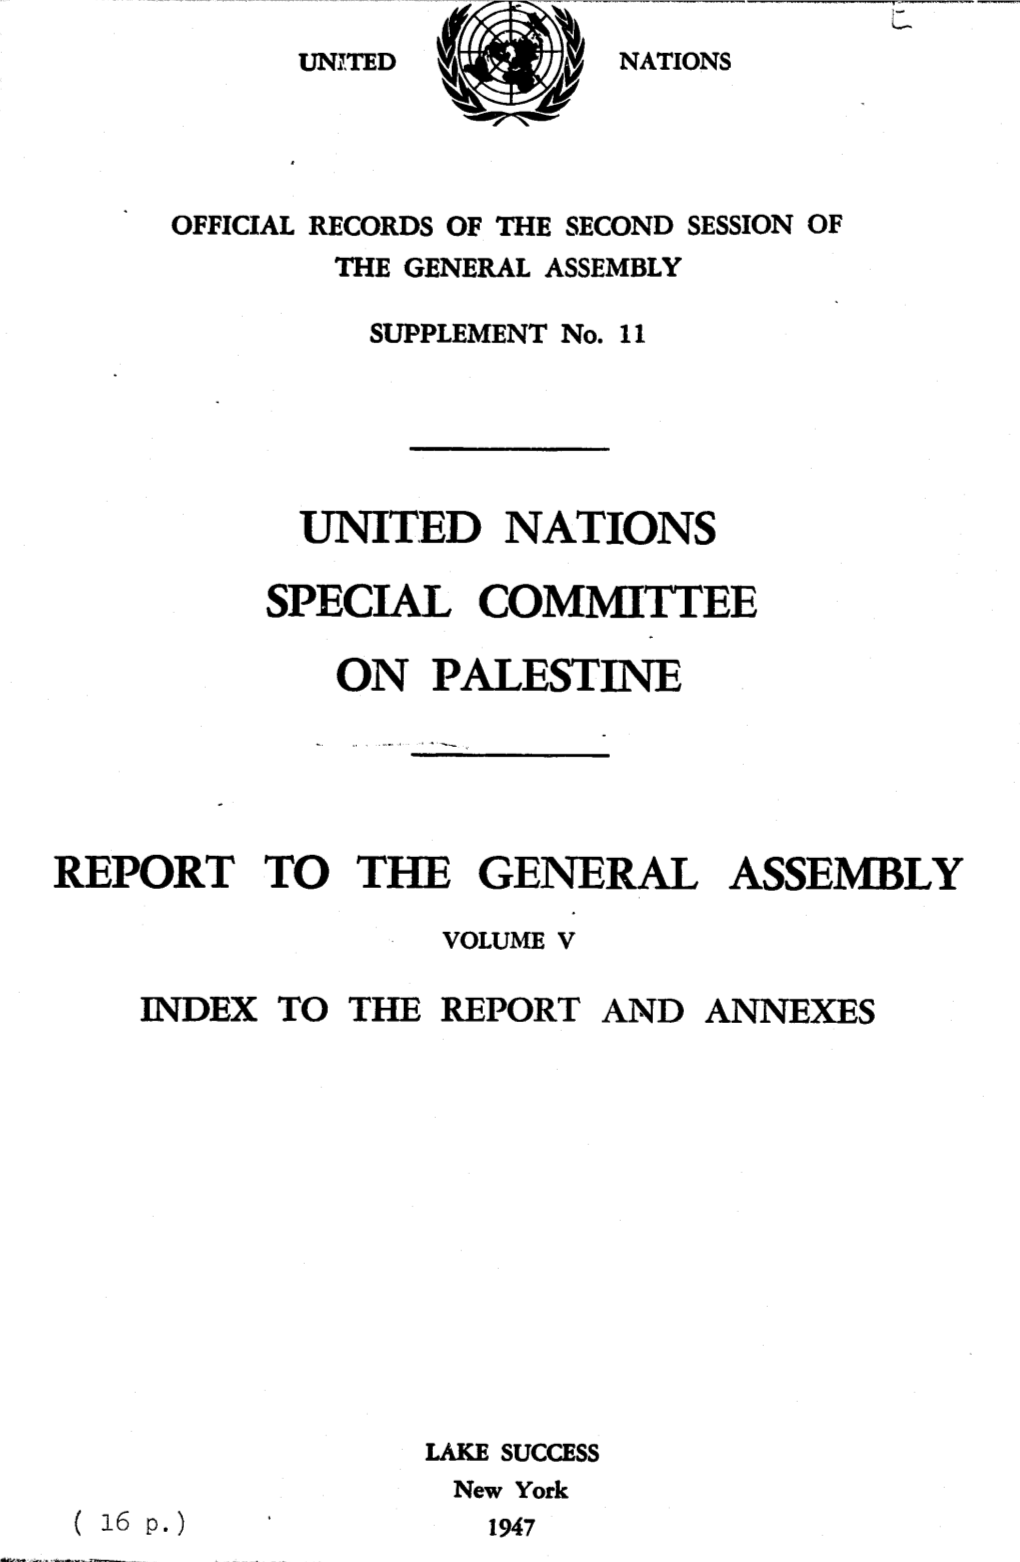 United Nations Special Committee on Palestine